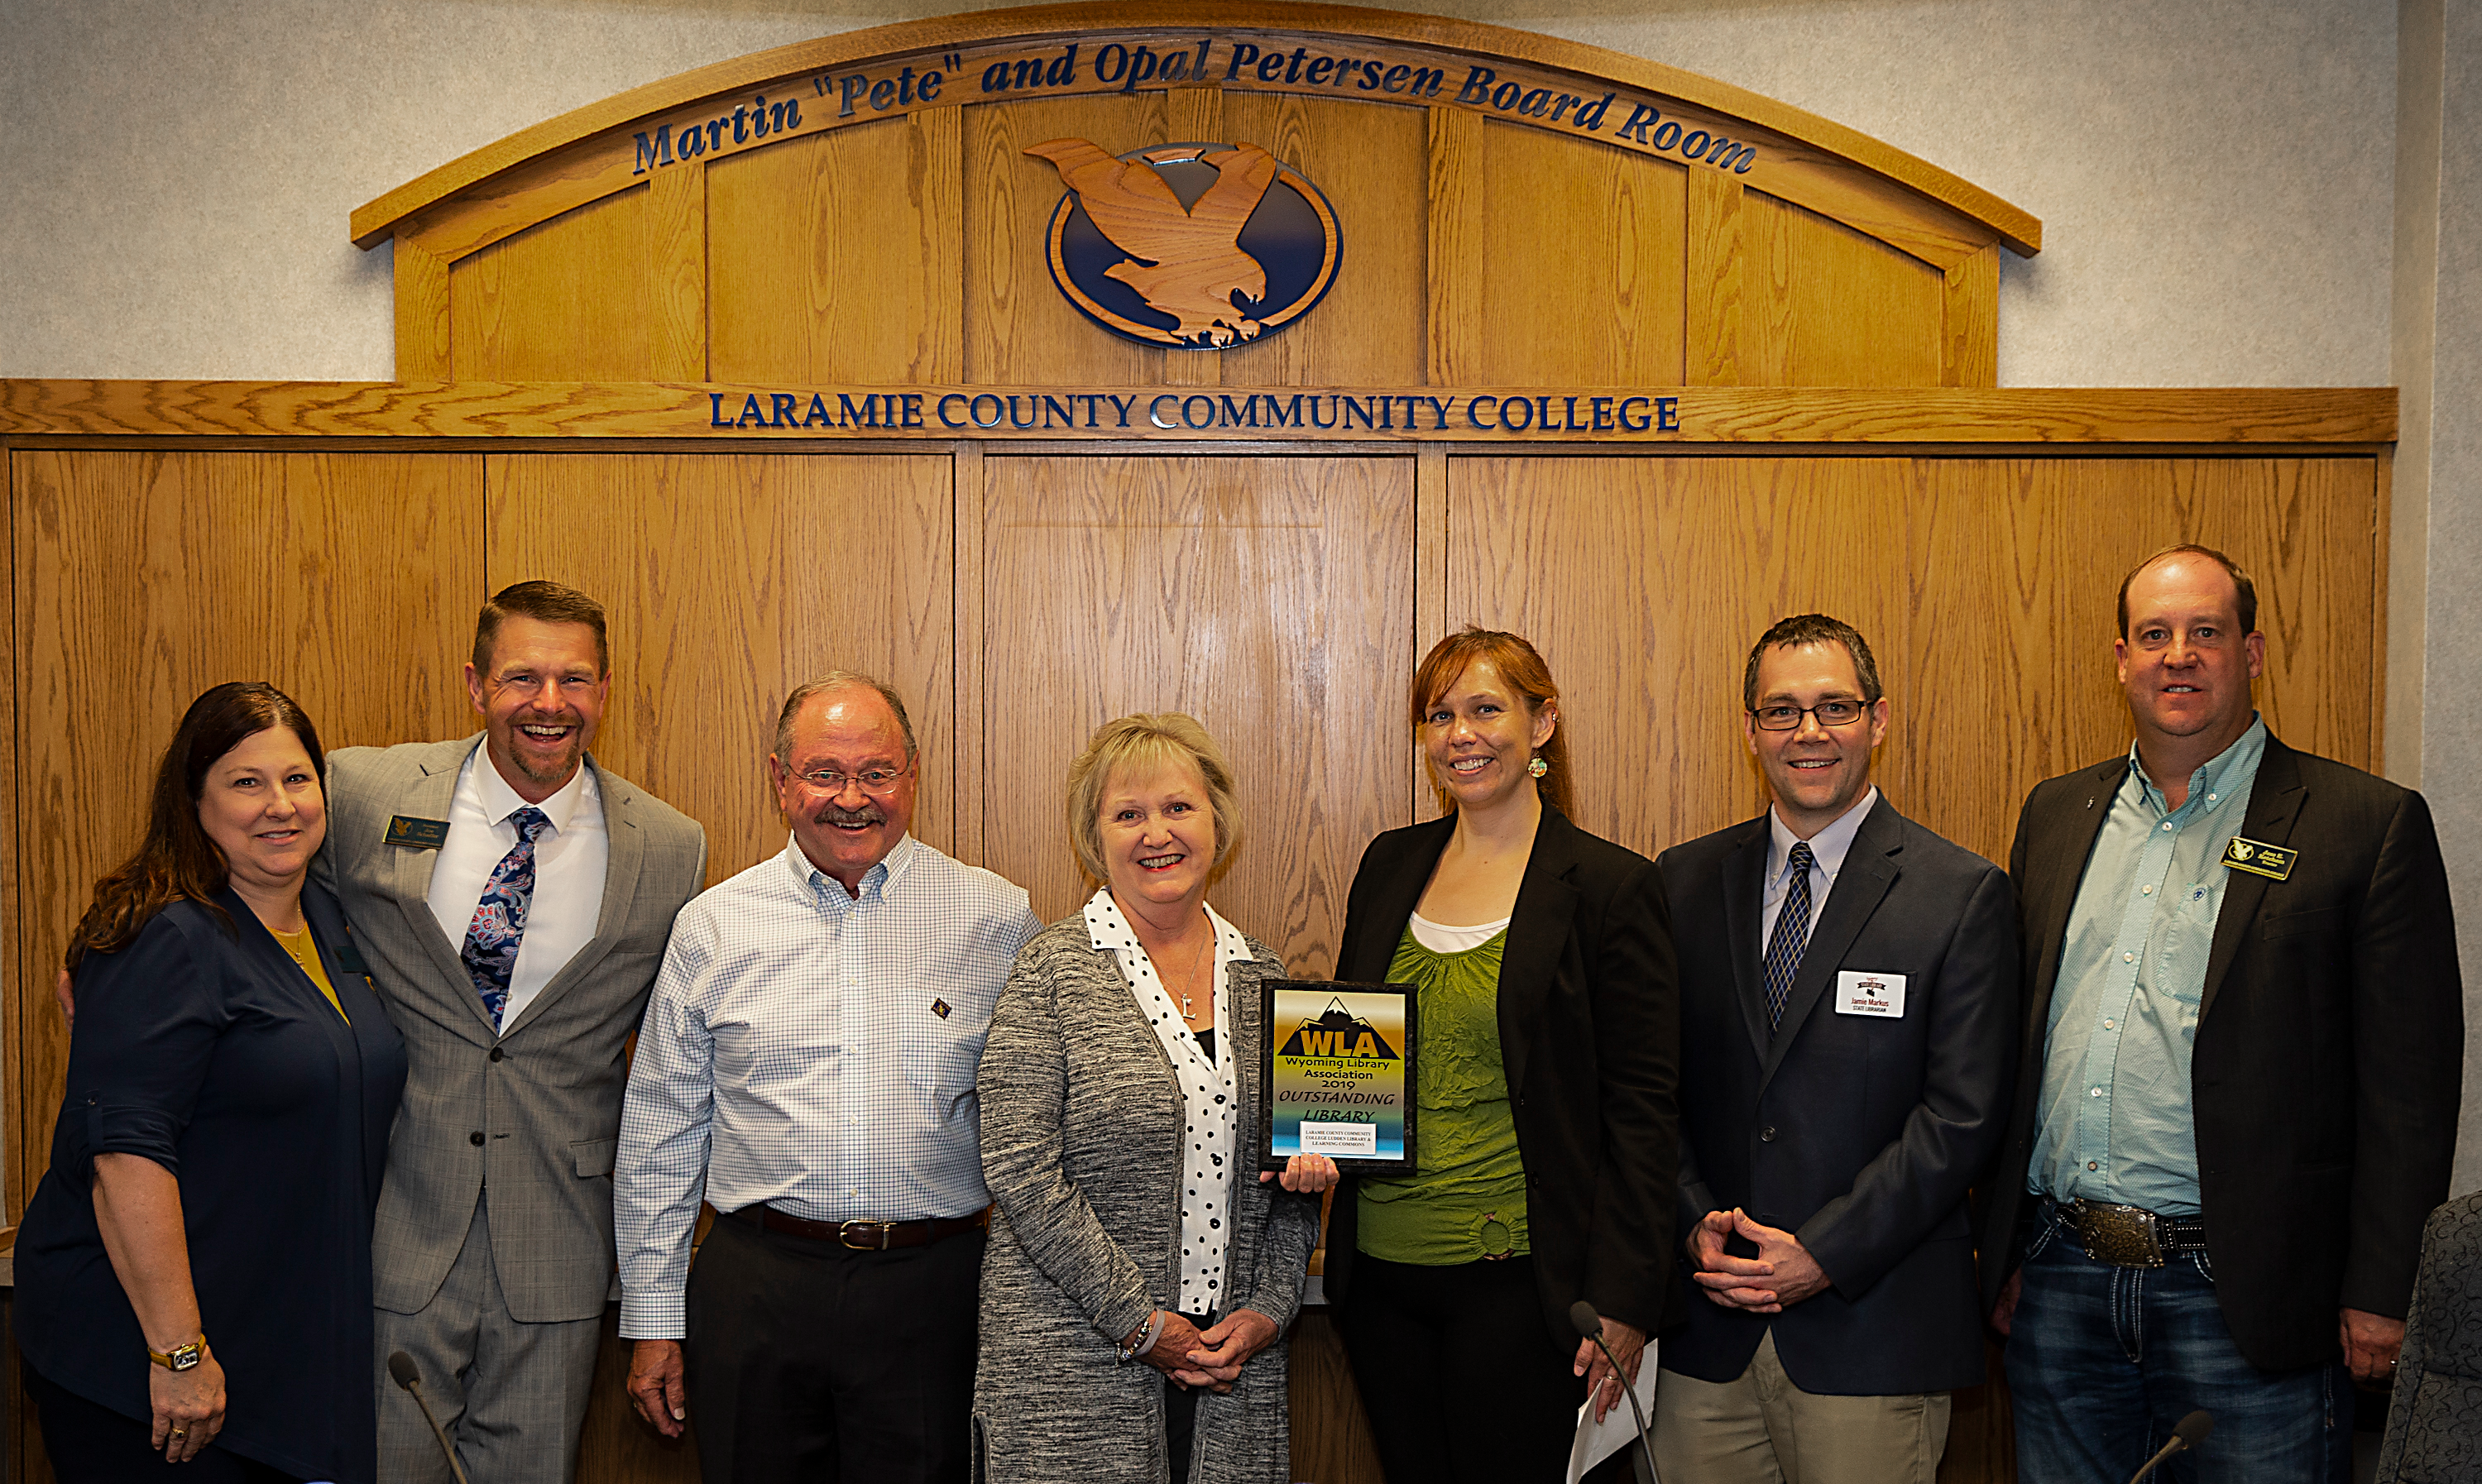 The award was presented at the LCCC Board of Trustees’ meeting on Wednesday, Aug. 21. From left: Linda Herget of the LCCC Ludden Library; Dr. Joe Schaffer, President of LCCC; Randy Ludden; Yvonne Ludden; Abby Beaver, President of WLA; Jamie Markus, Wyoming State Librarian; and Jess Ketcham, Chairman of the LCCC Board of Trustees.